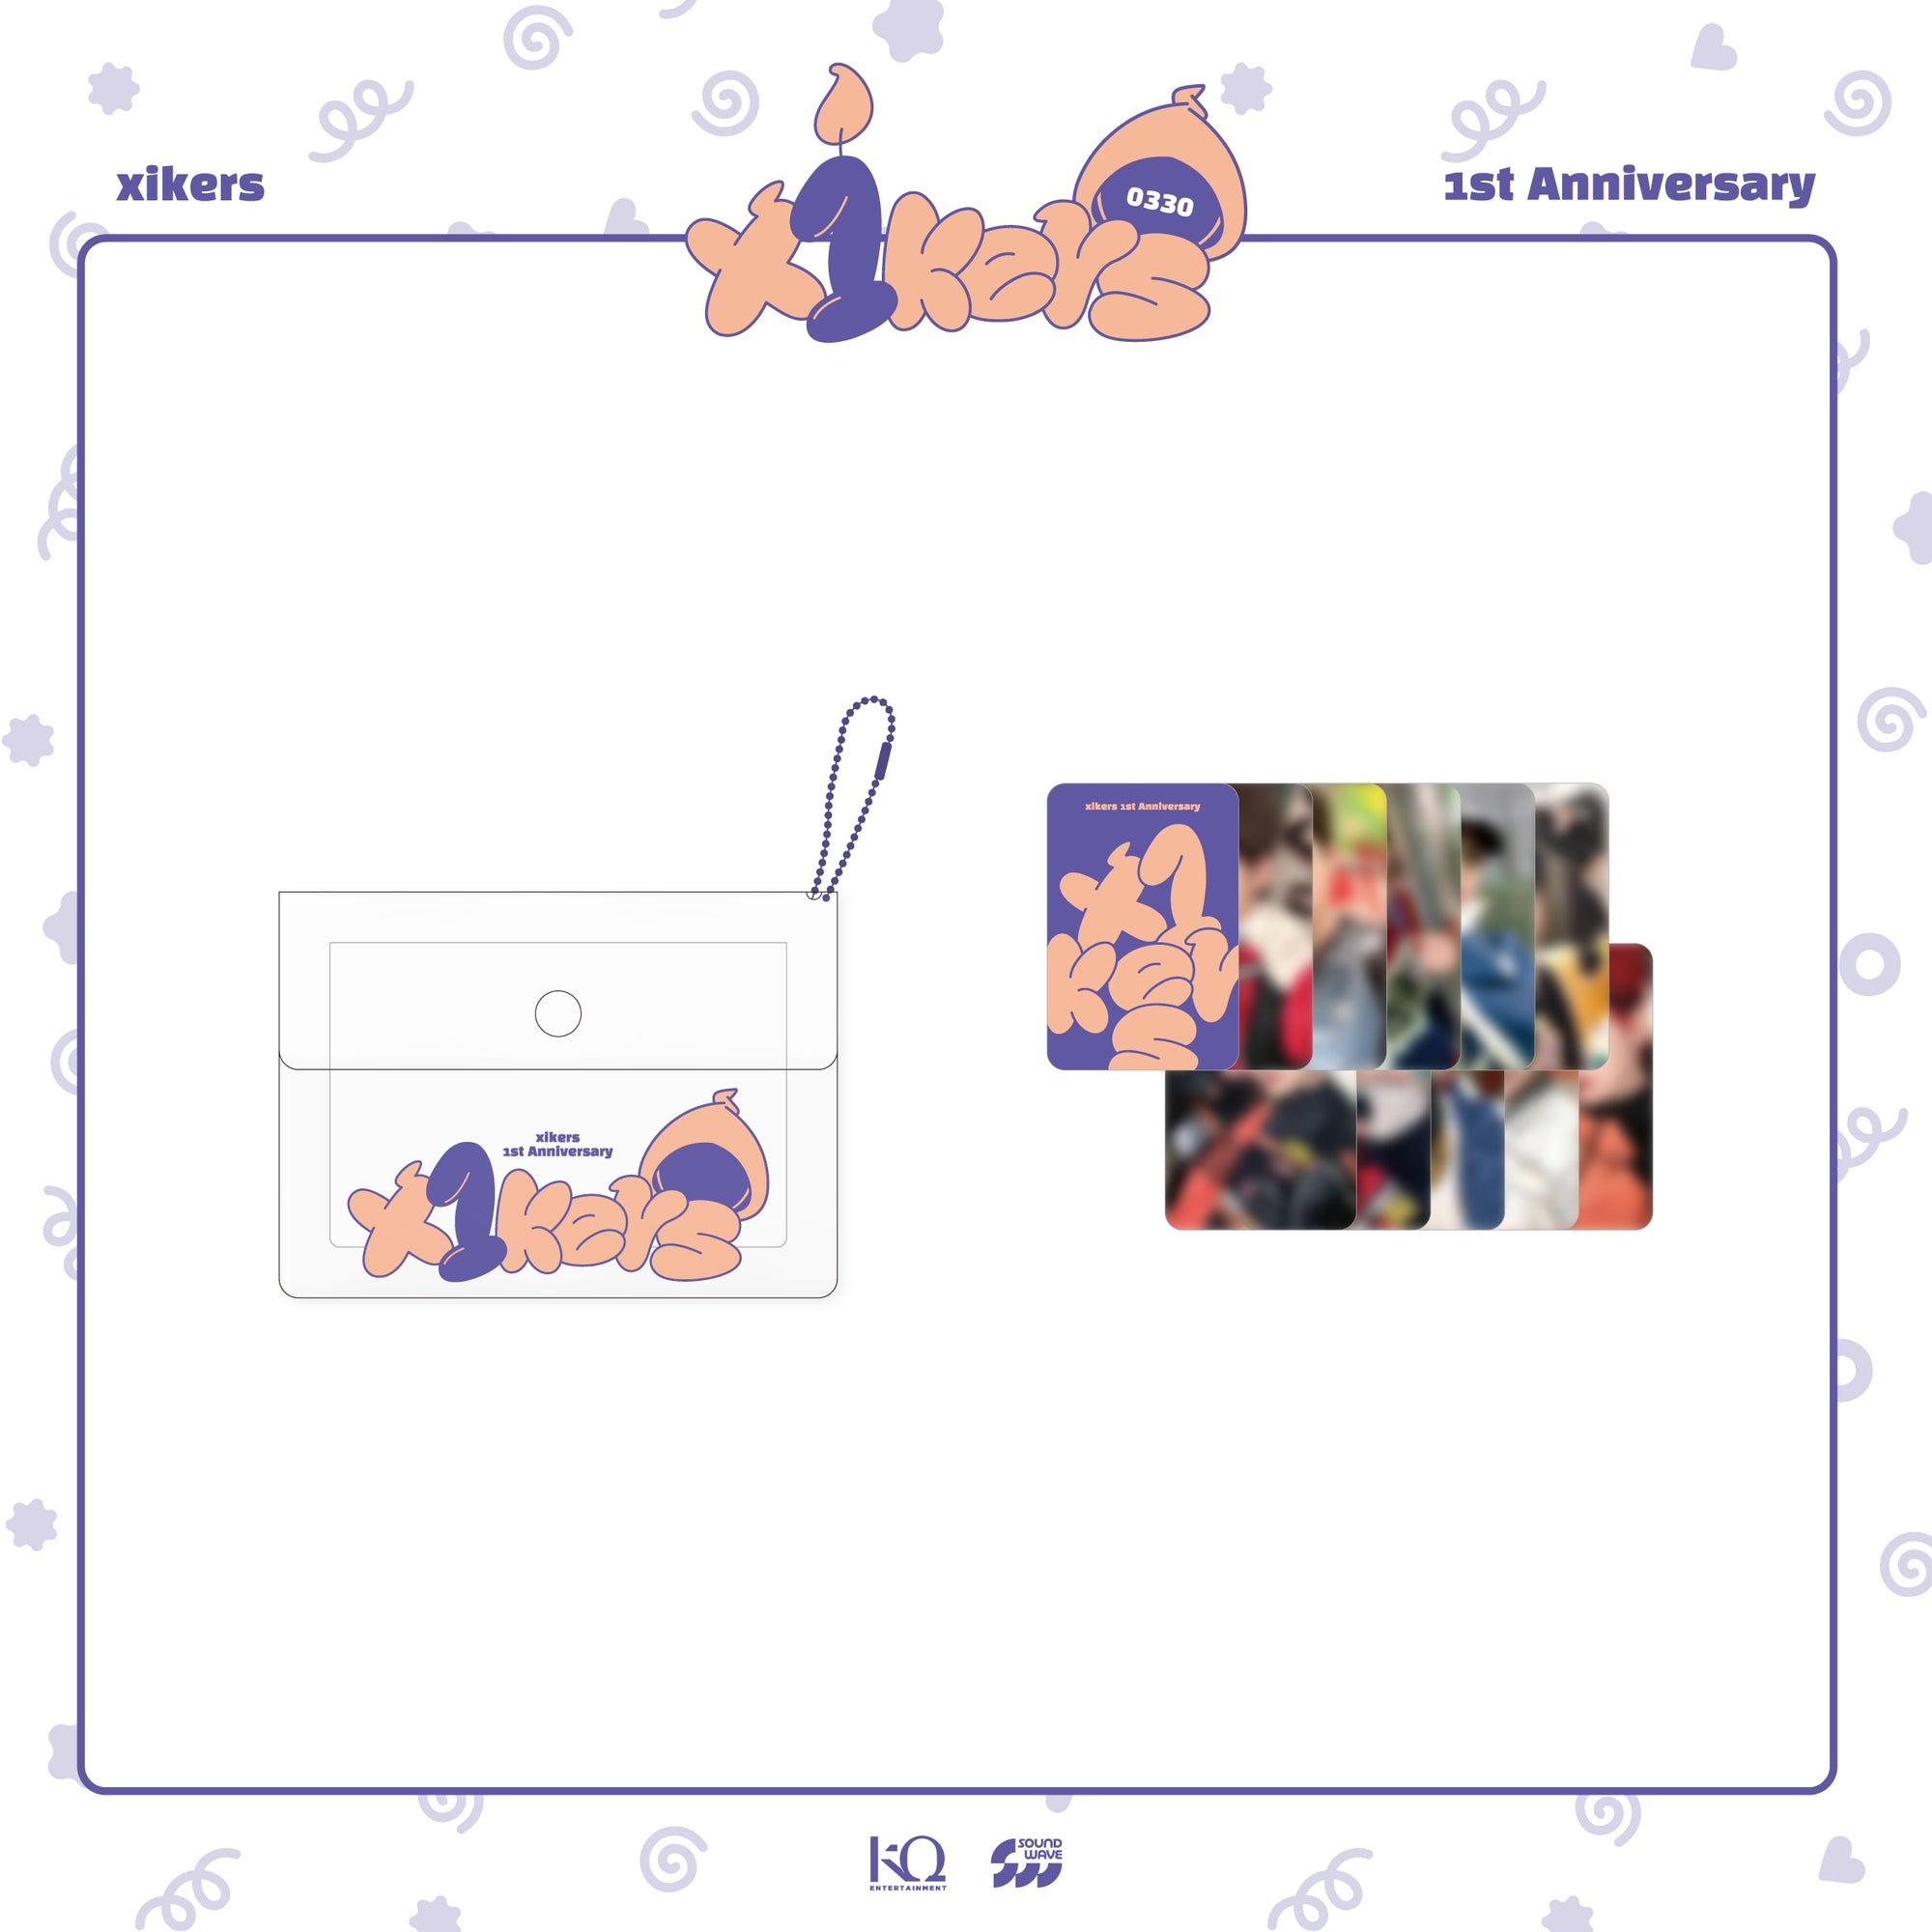 XIKERS - 'x1kers' 1ST ANNIVERSARY OFFICIAL MD PVC CARD POUCH